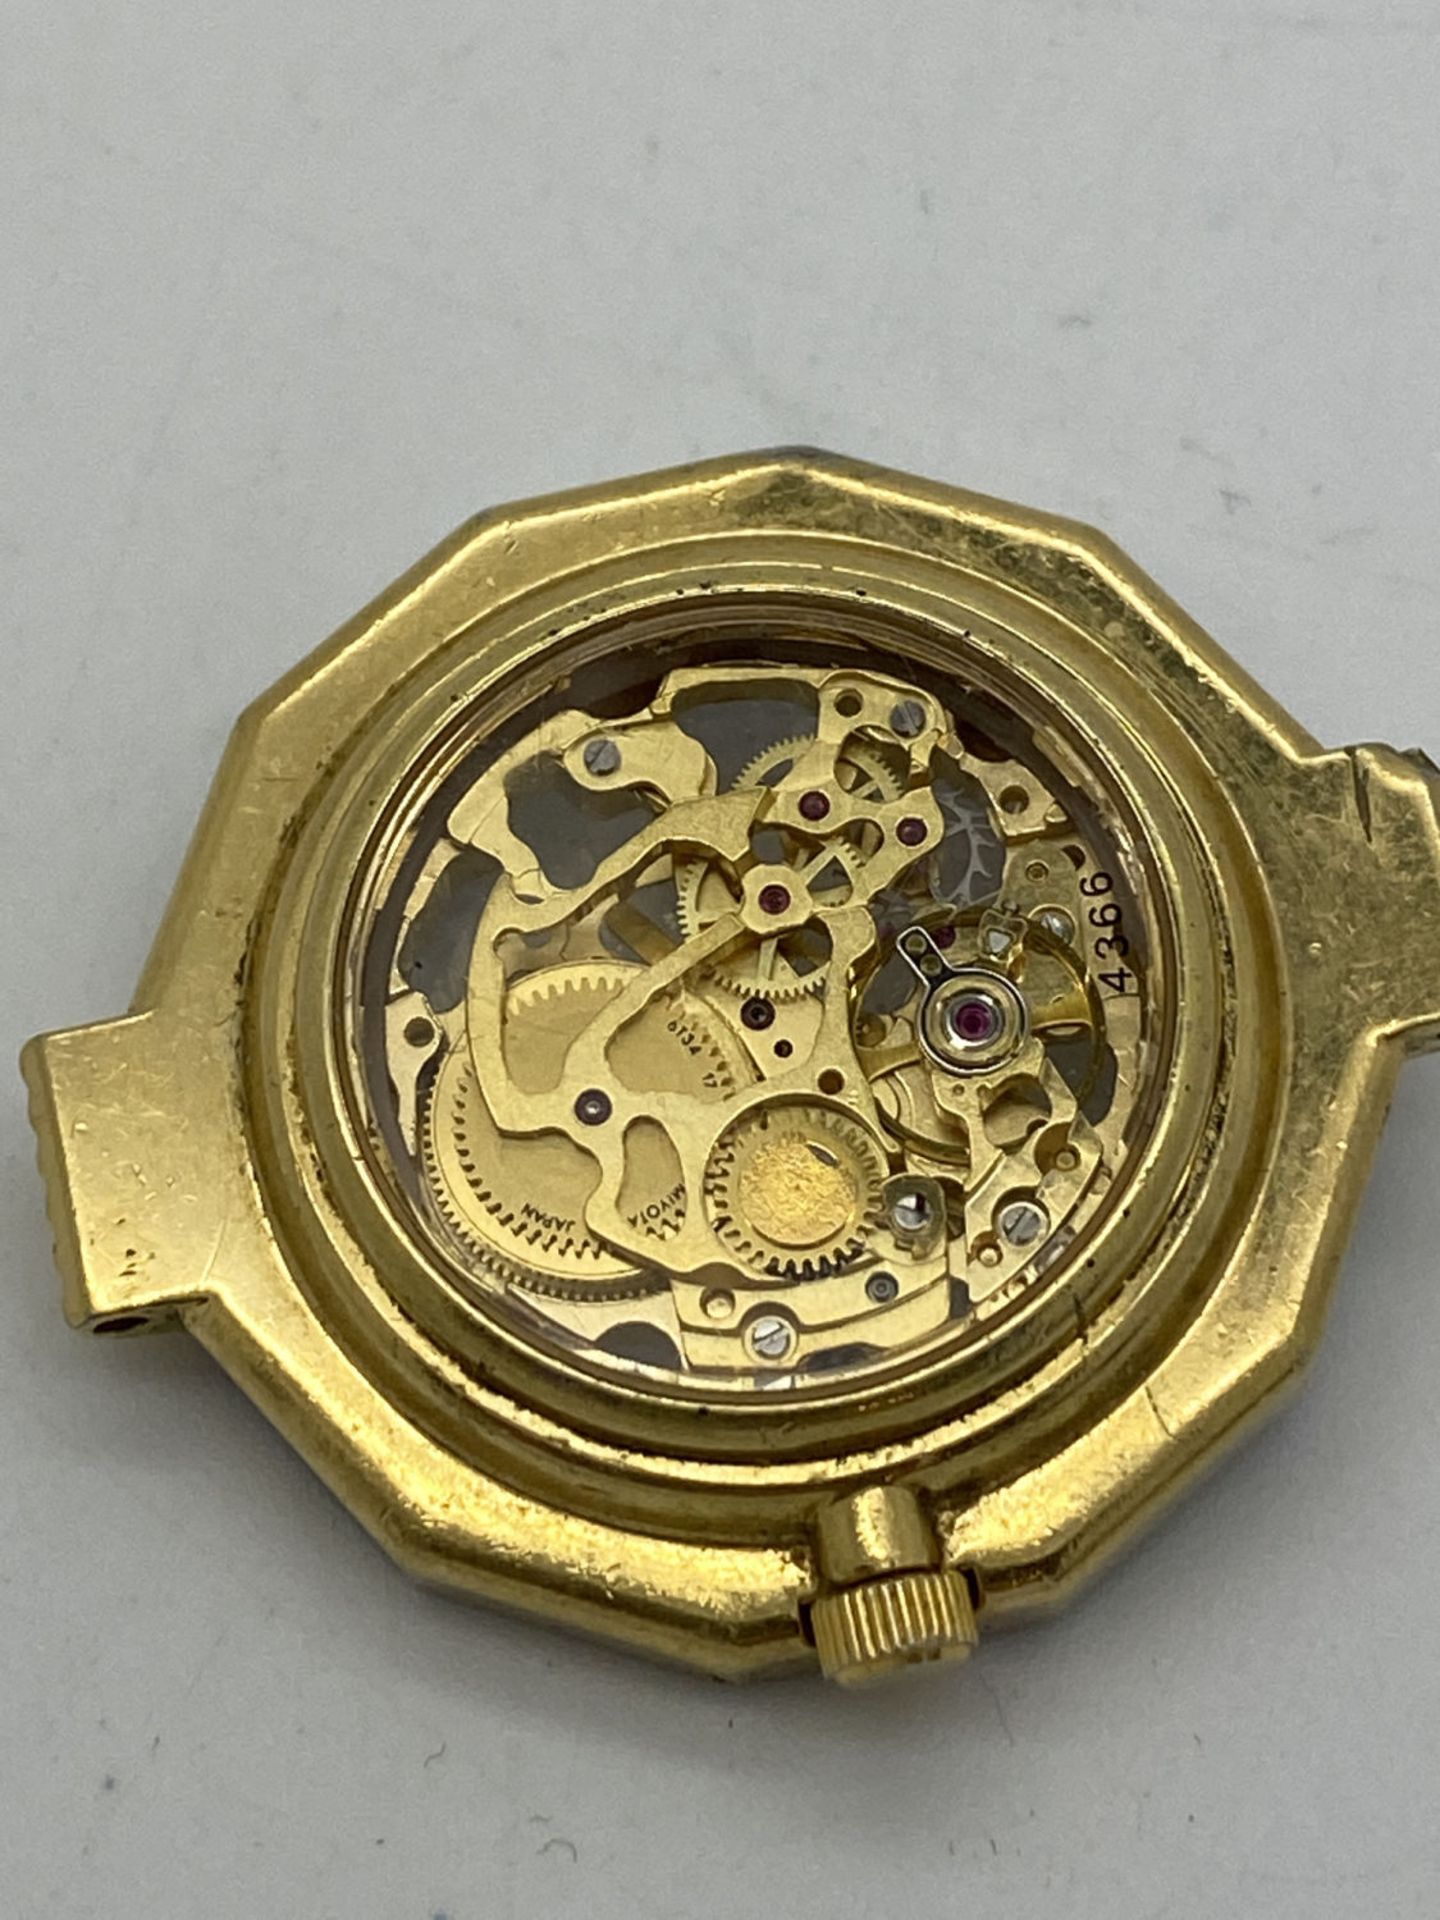 ROTARY WATCH MECHANICAL GOLD COLOURED - DAMAGED GLASS - Image 3 of 3